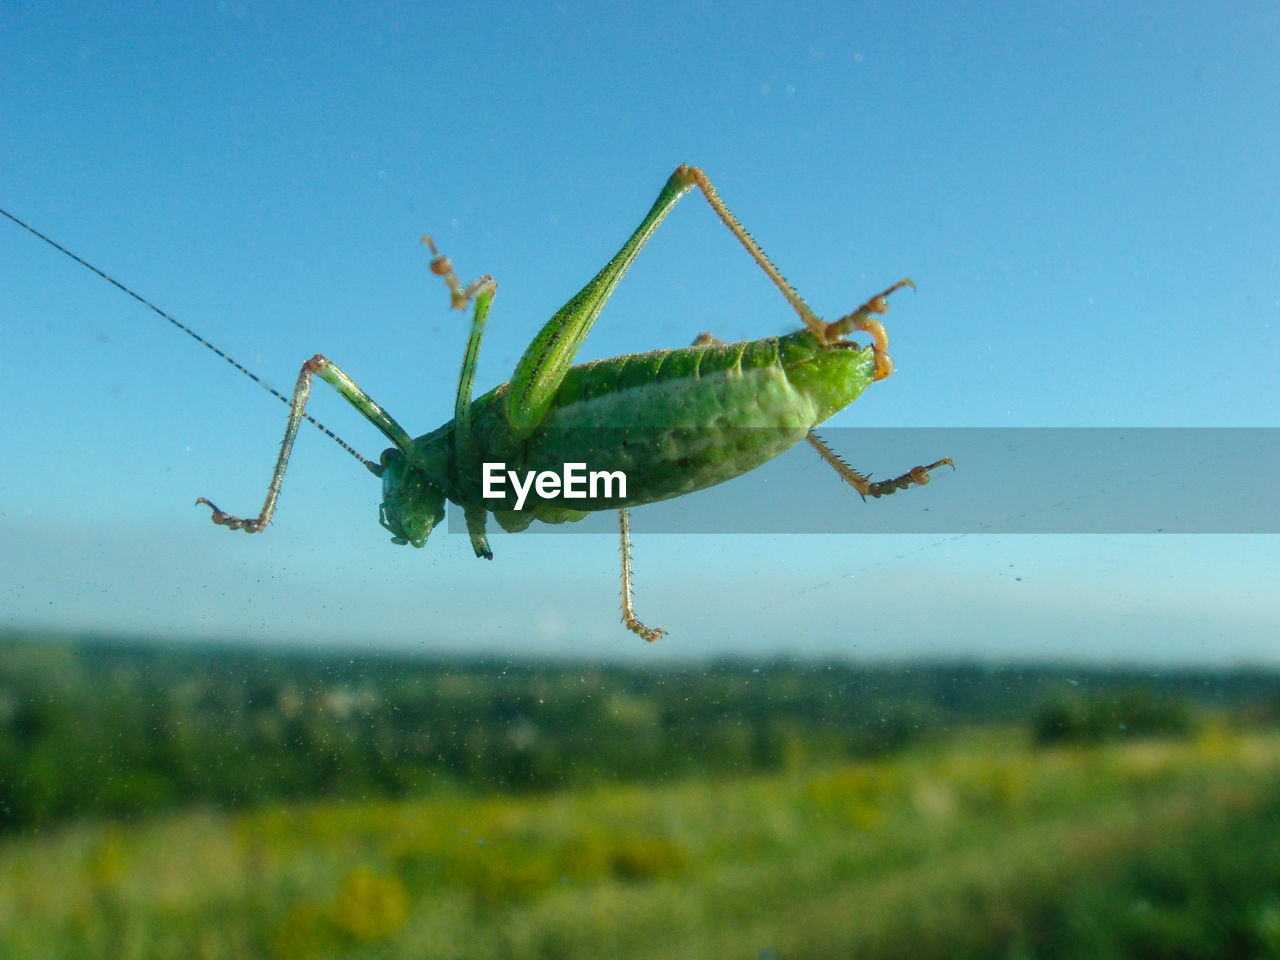 Close-up side view of grasshopper against clear blue sky